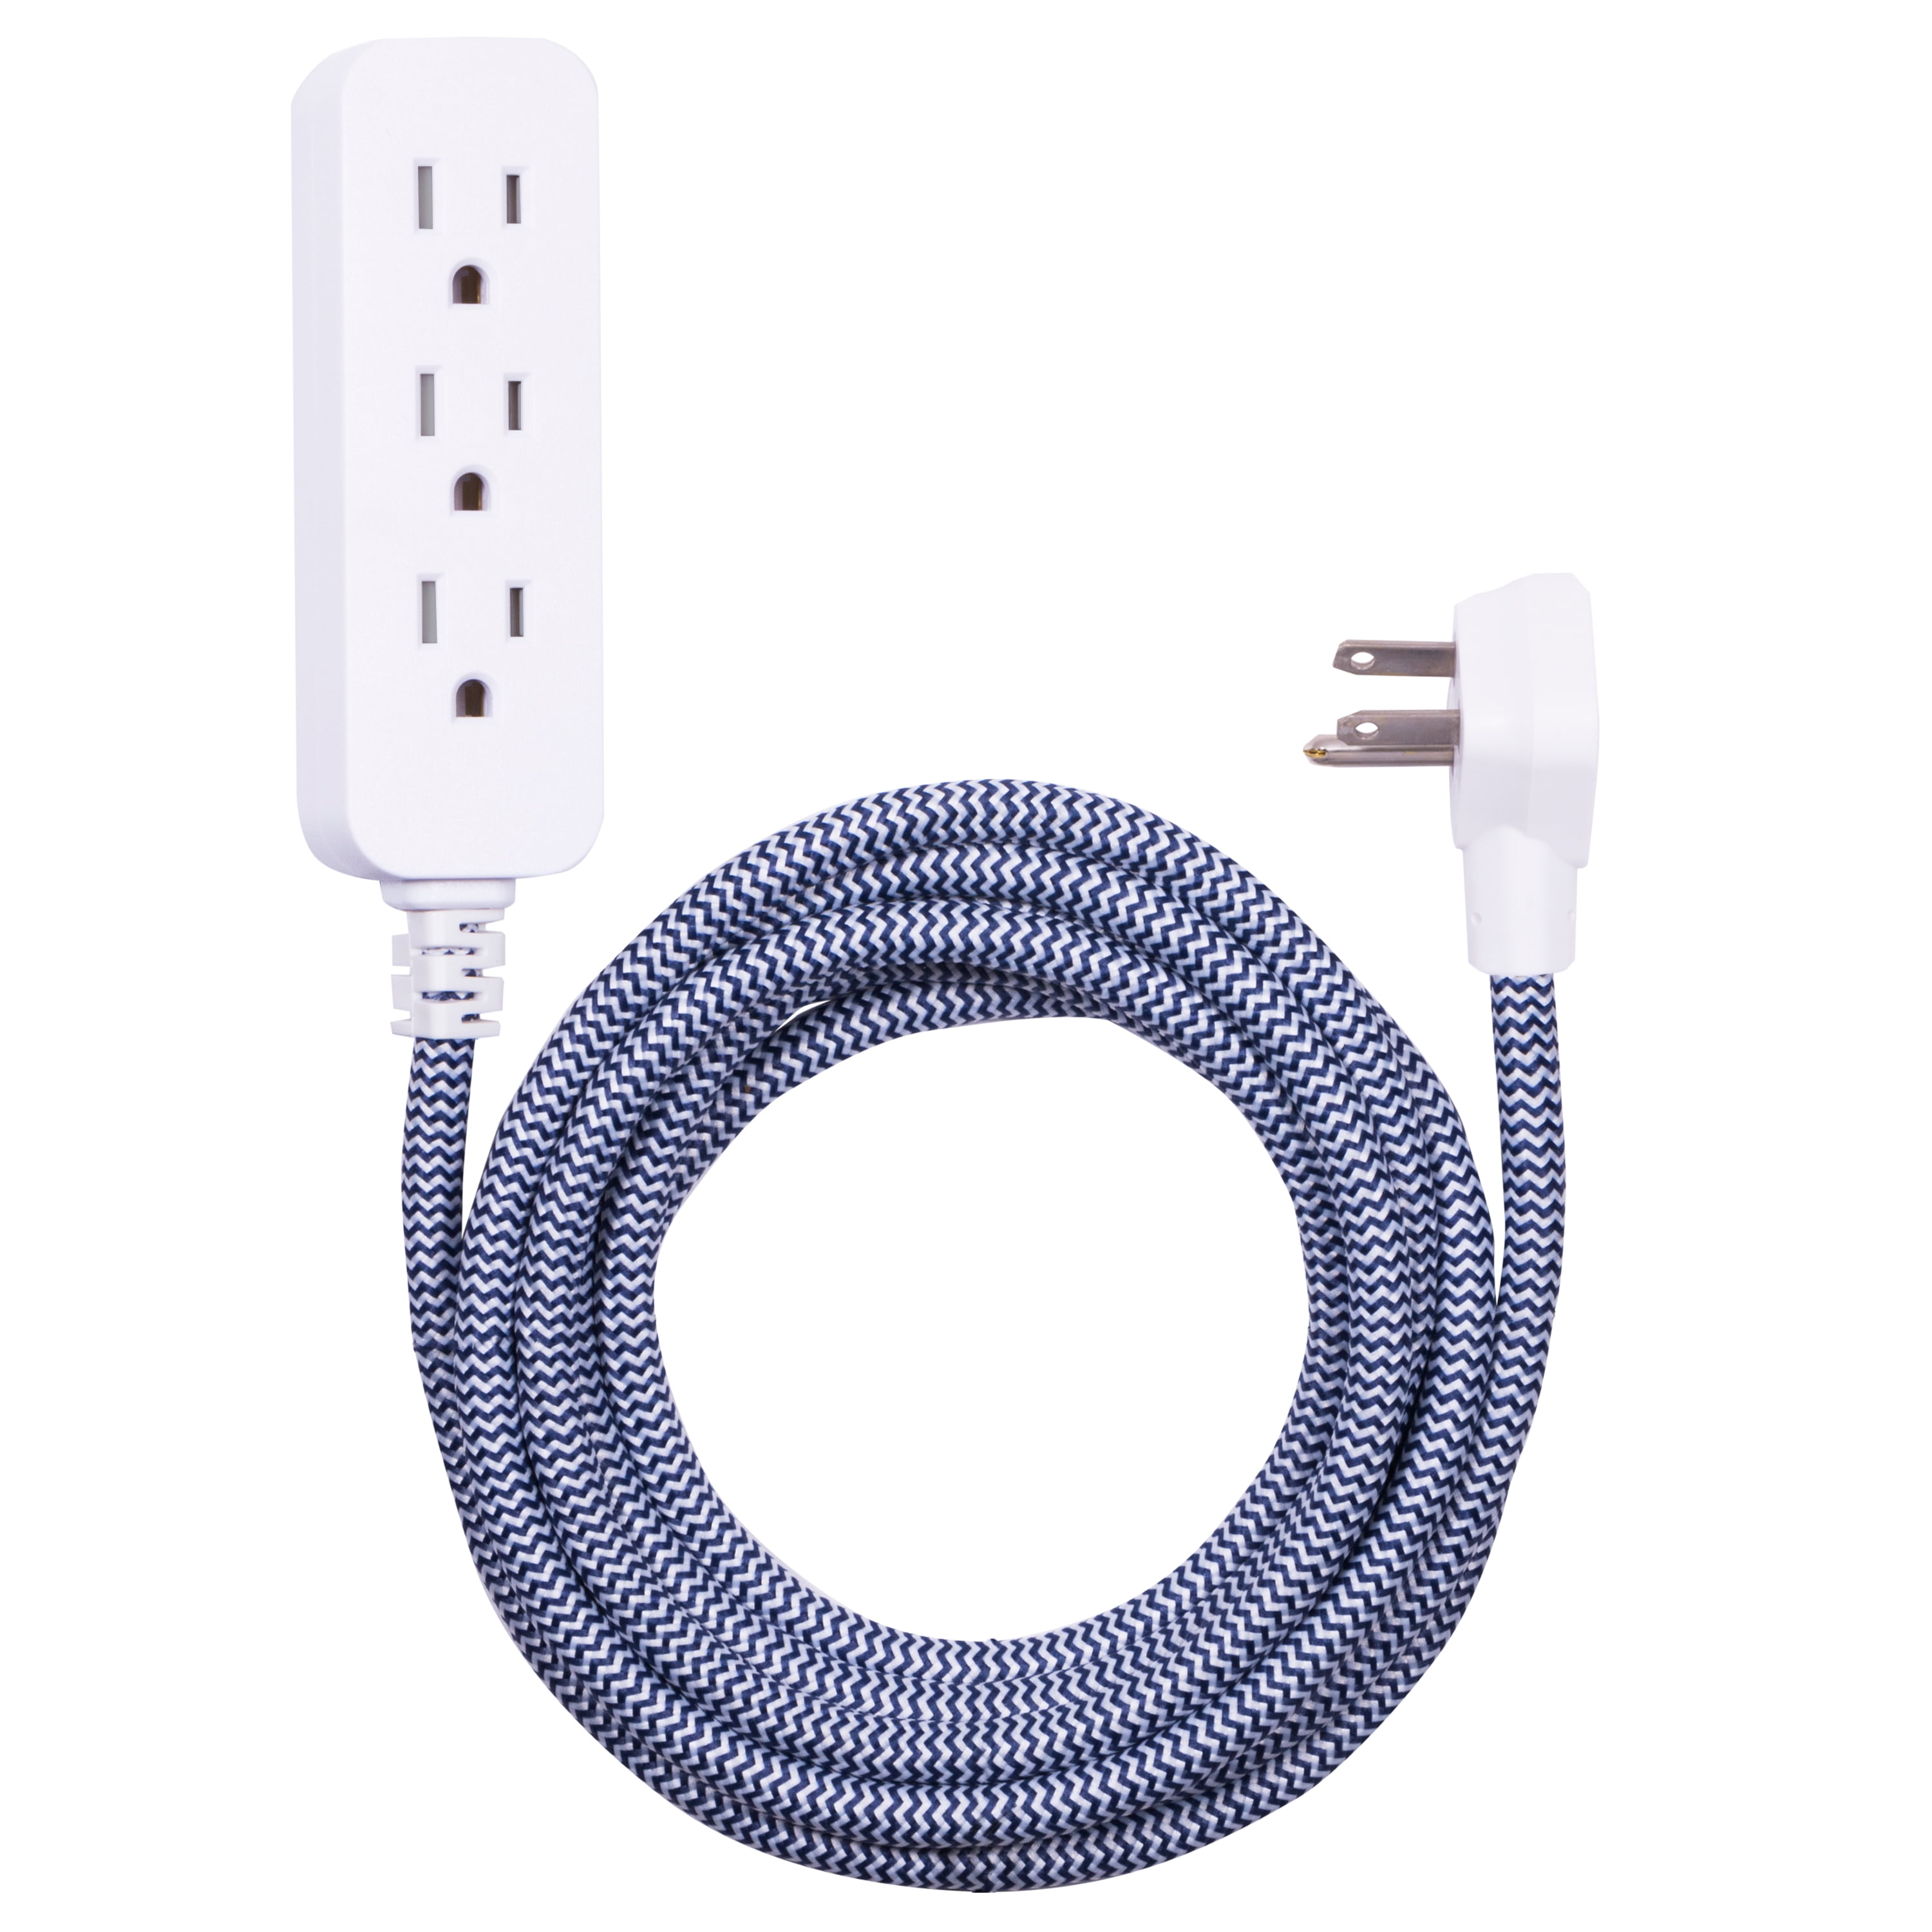 37914 10 ft Low-Profile Plug with Tamper Resistant Safety Outlets Gray Braided Décor Fabric Cord Cordinate Designer 3-Outlet Extension Cord with Surge Protection 